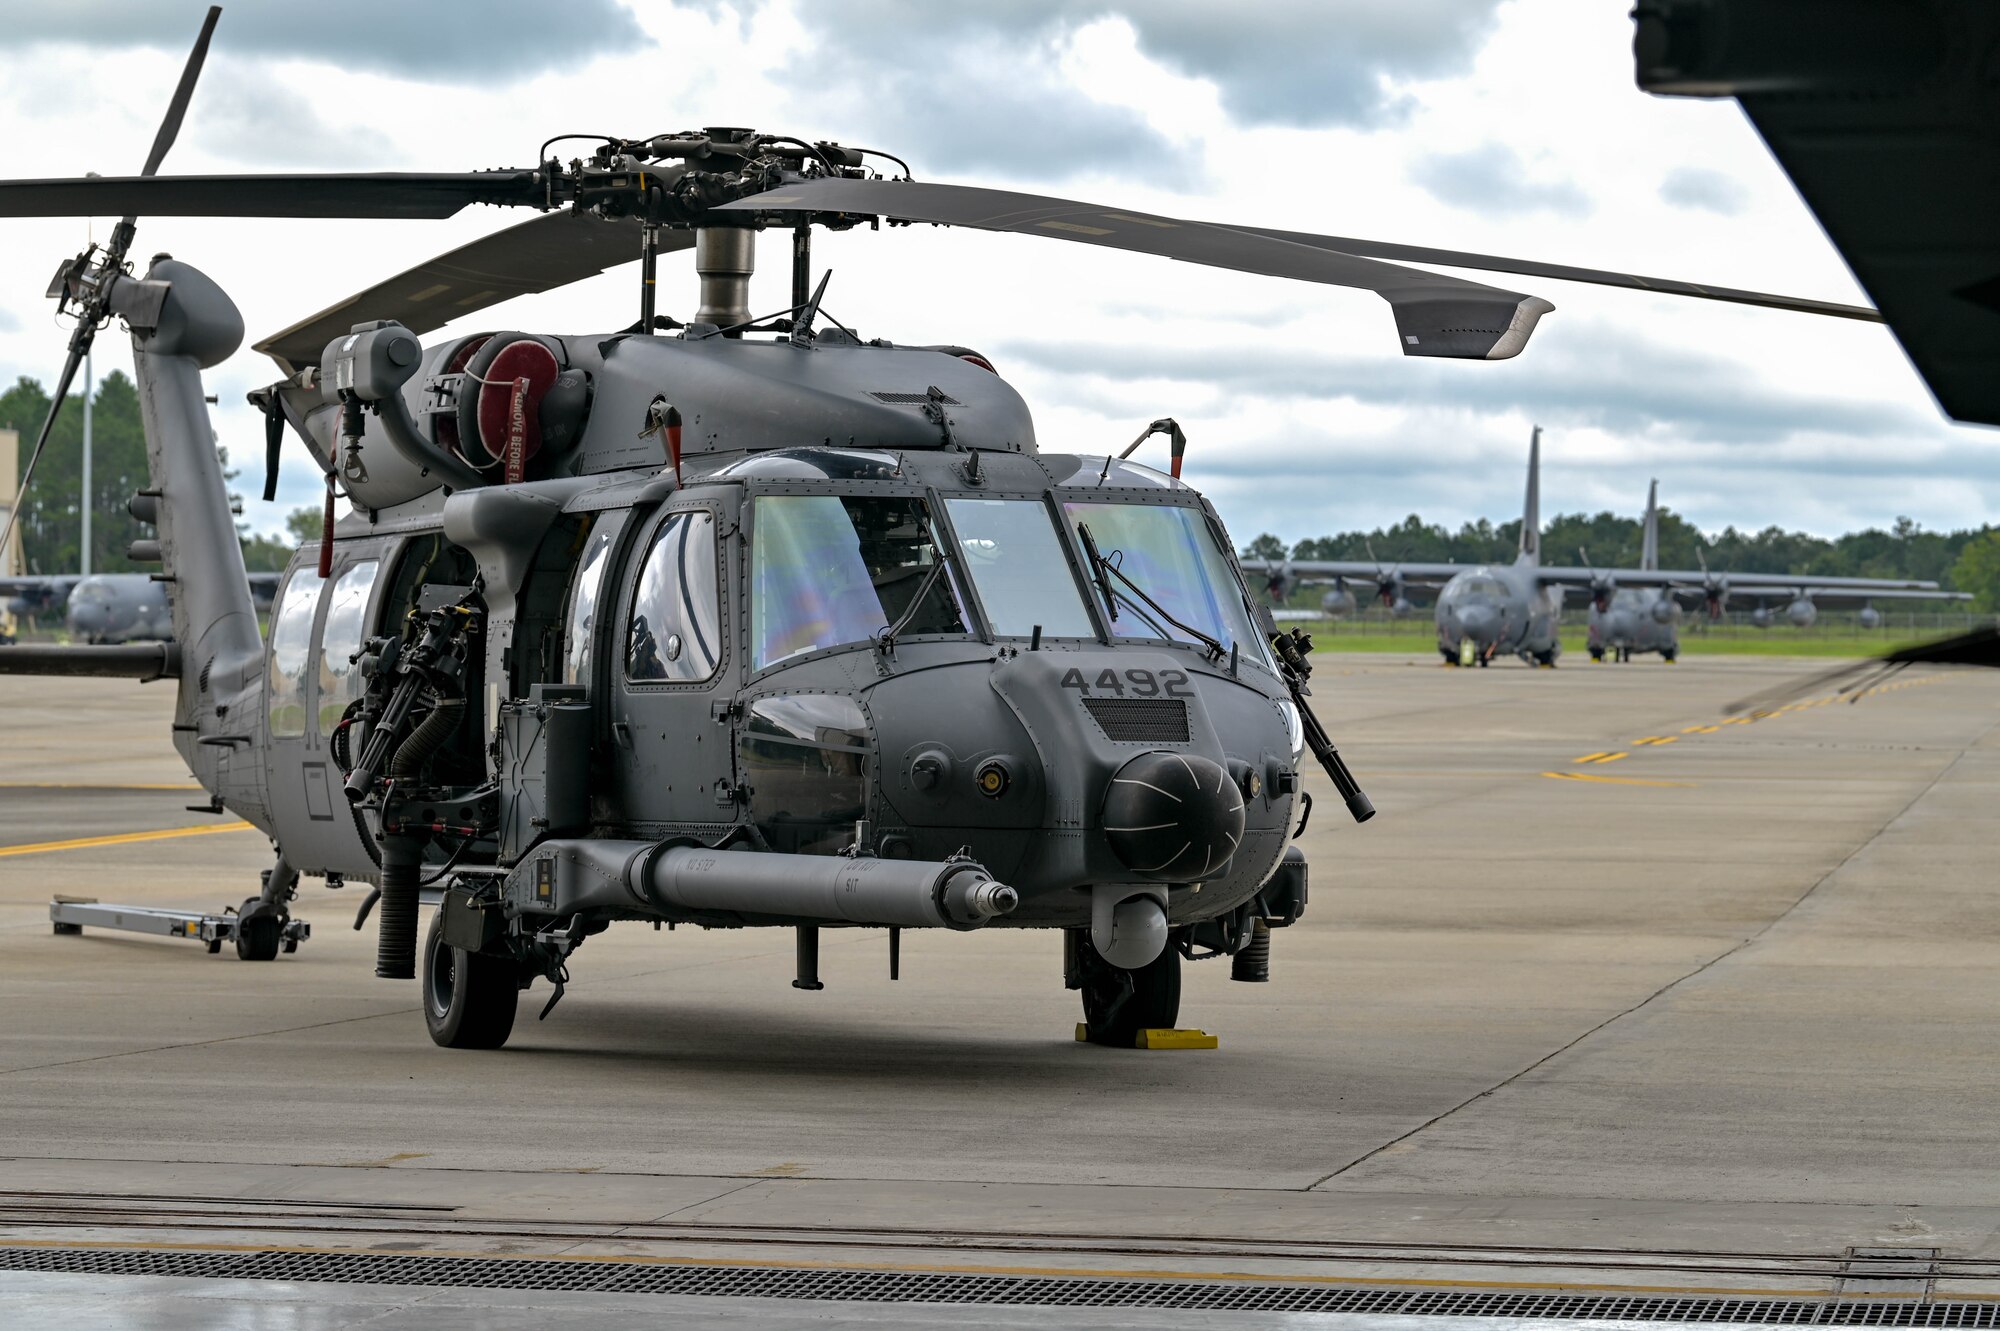 An HH-60W Jolly Green II helicopter is parked on the flight line during the HH-60W Initial Operational Capability ceremony, Sept. 9, 2022 at Moody Air Force Base, Georgia. The ceremony displayed the platform’s operational capabilities and signifies that the HH-60W has met the criteria for IOC and awaits declaration. (U.S. Air Force photo by Senior Airman Rebeckah Medeiros)